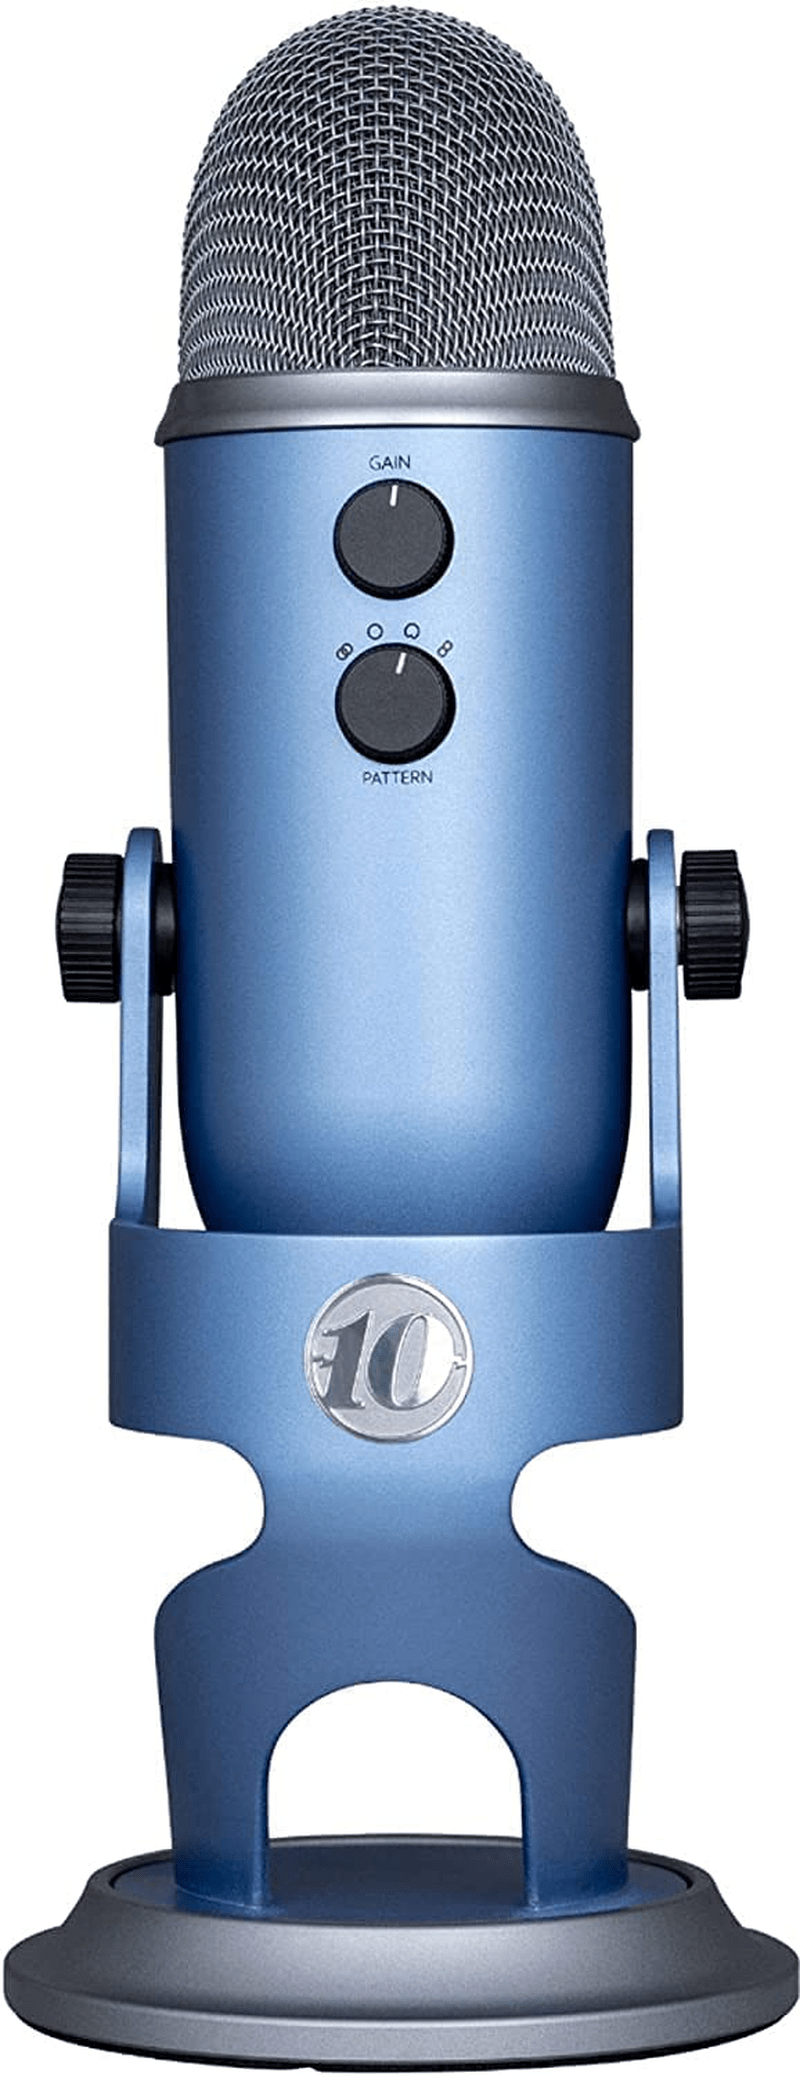 Blue Yeti USB Mic for Recording & Streaming on PC and Mac, 3 Condenser Capsules, 4 Pickup Patterns, Headphone Output and Volume Control, Mic Gain Control, Adjustable Stand, Plug & Play – Blackout Electronics > Audio > Audio Components > Microphones KOL DEALS 10yr Anniversary Custom Finish  